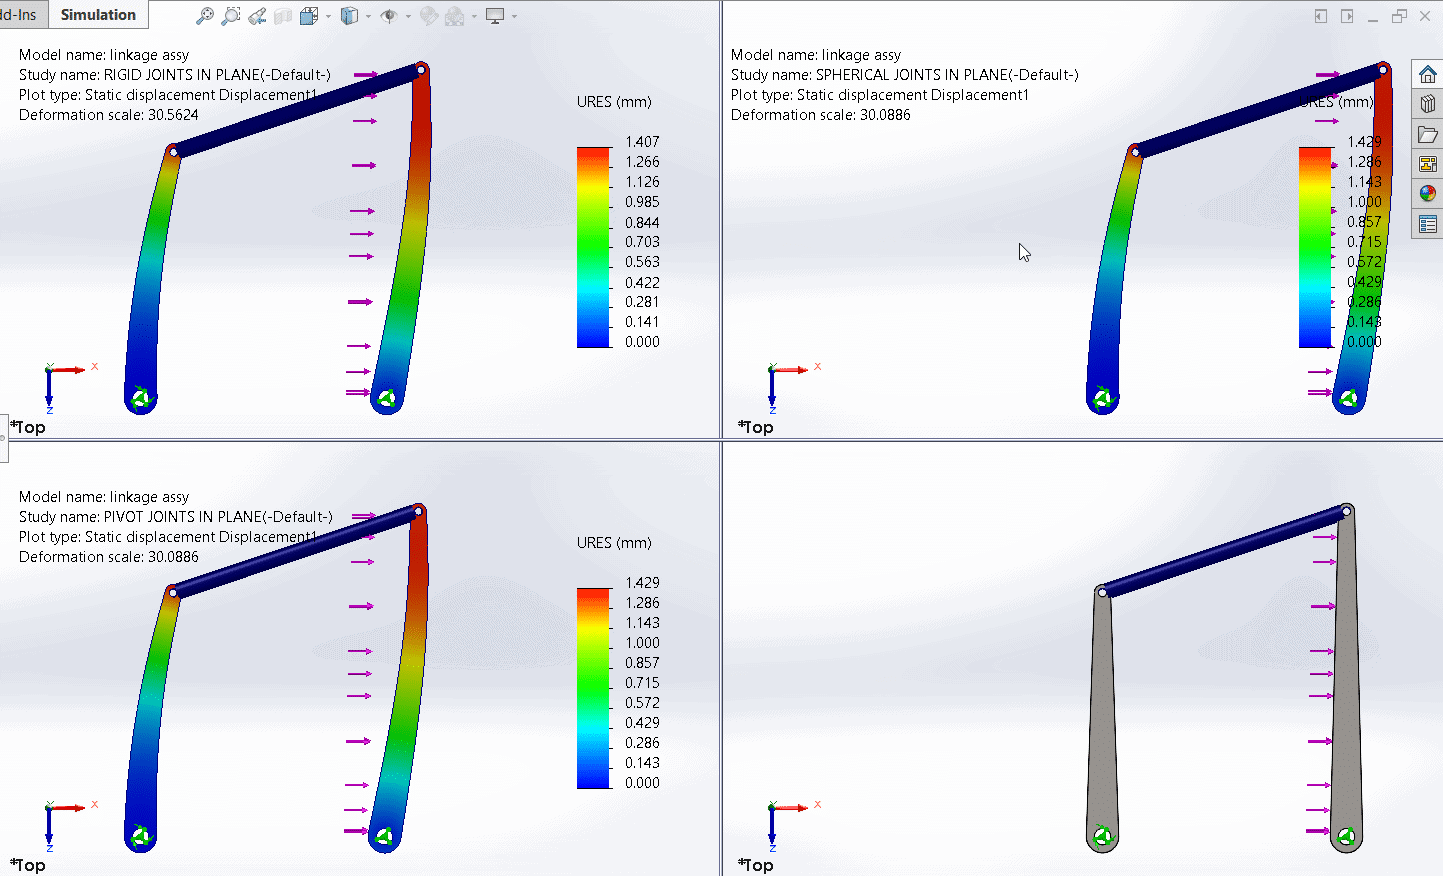 solidworks simulation 2022 displacement results